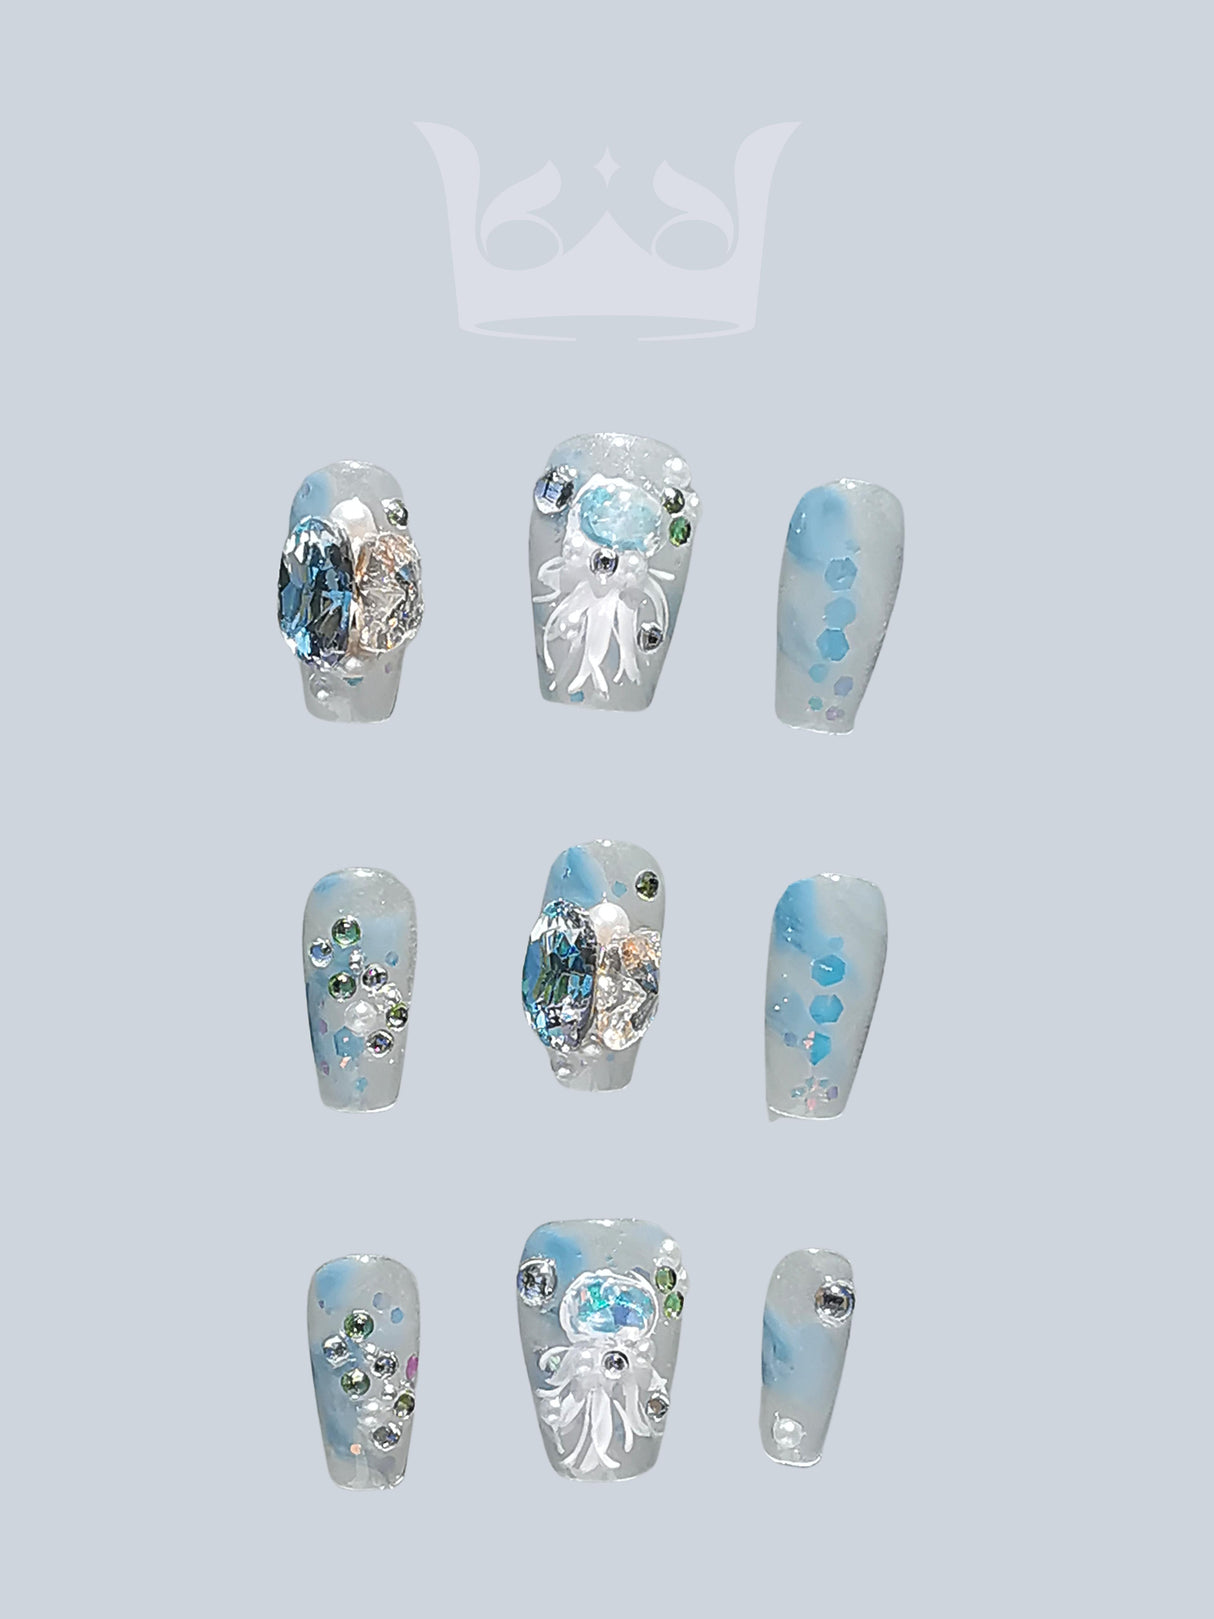 These press-on nails are for nail art enthusiasts who want unique designs with a cool color palette and water-themed patterns. 